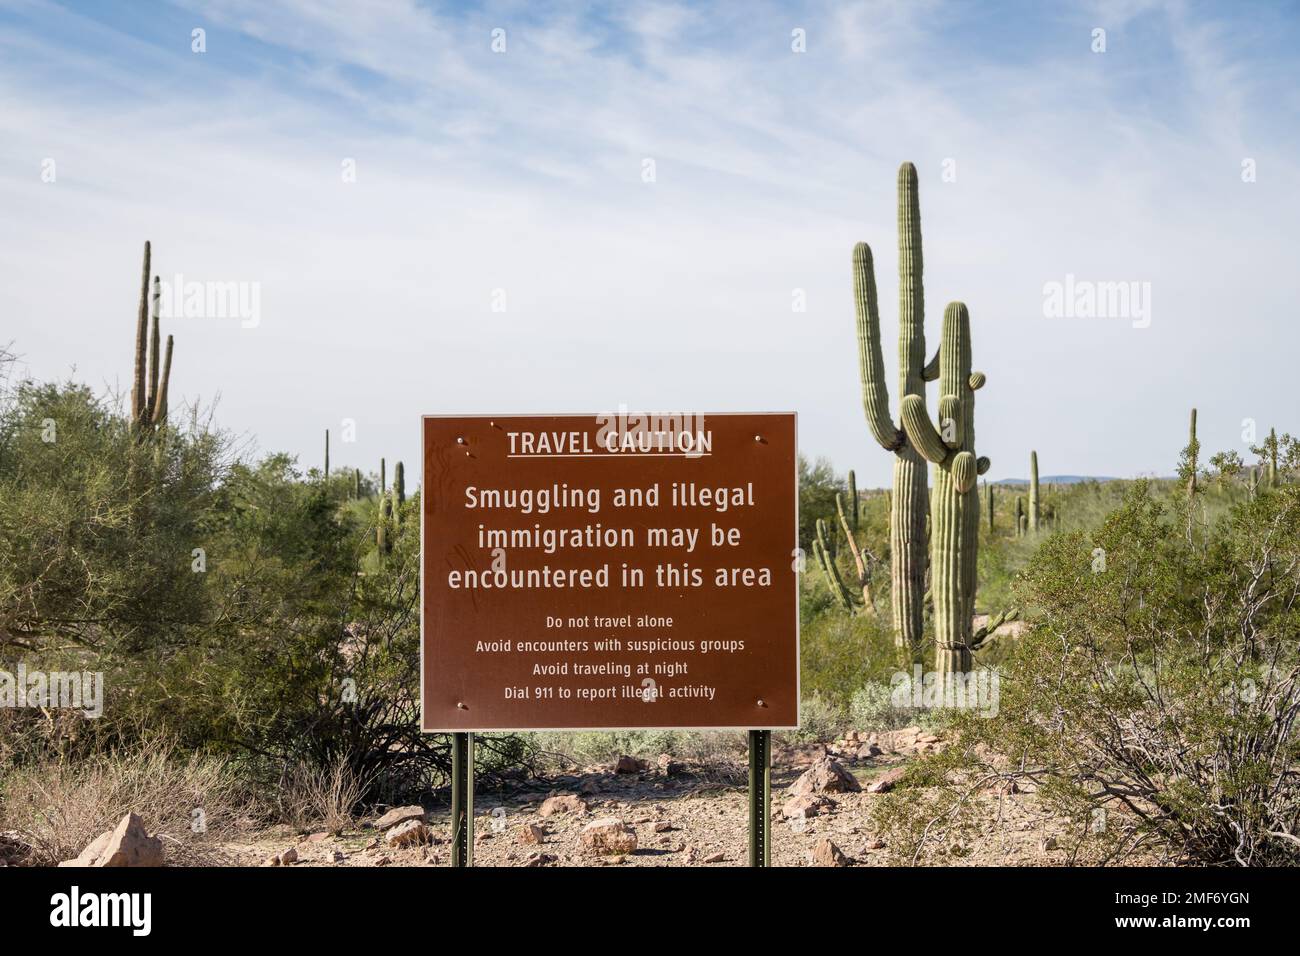 Sign near US - Mexican border wall reading Caution smuggling and illegal immigration in this area - Arizona Stock Photo